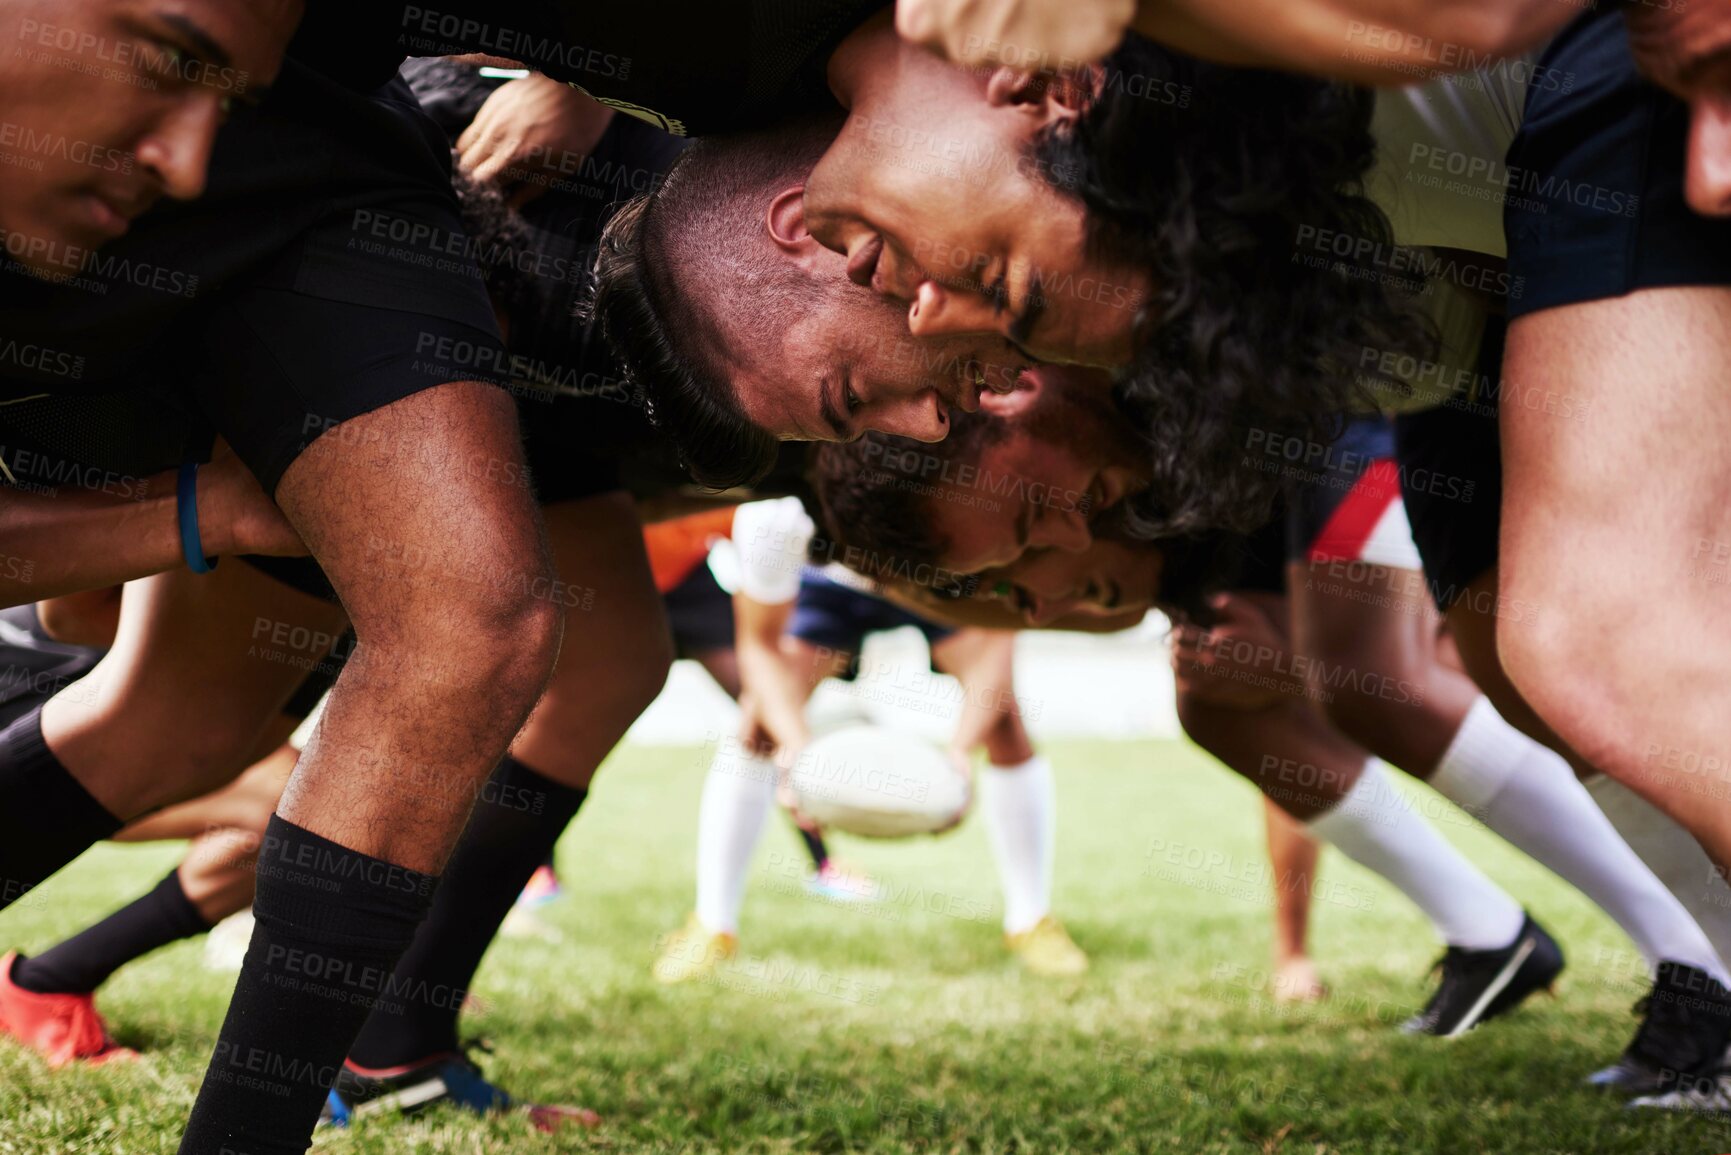 Buy stock photo Shot of a group of young rugby players in a scrum on the field